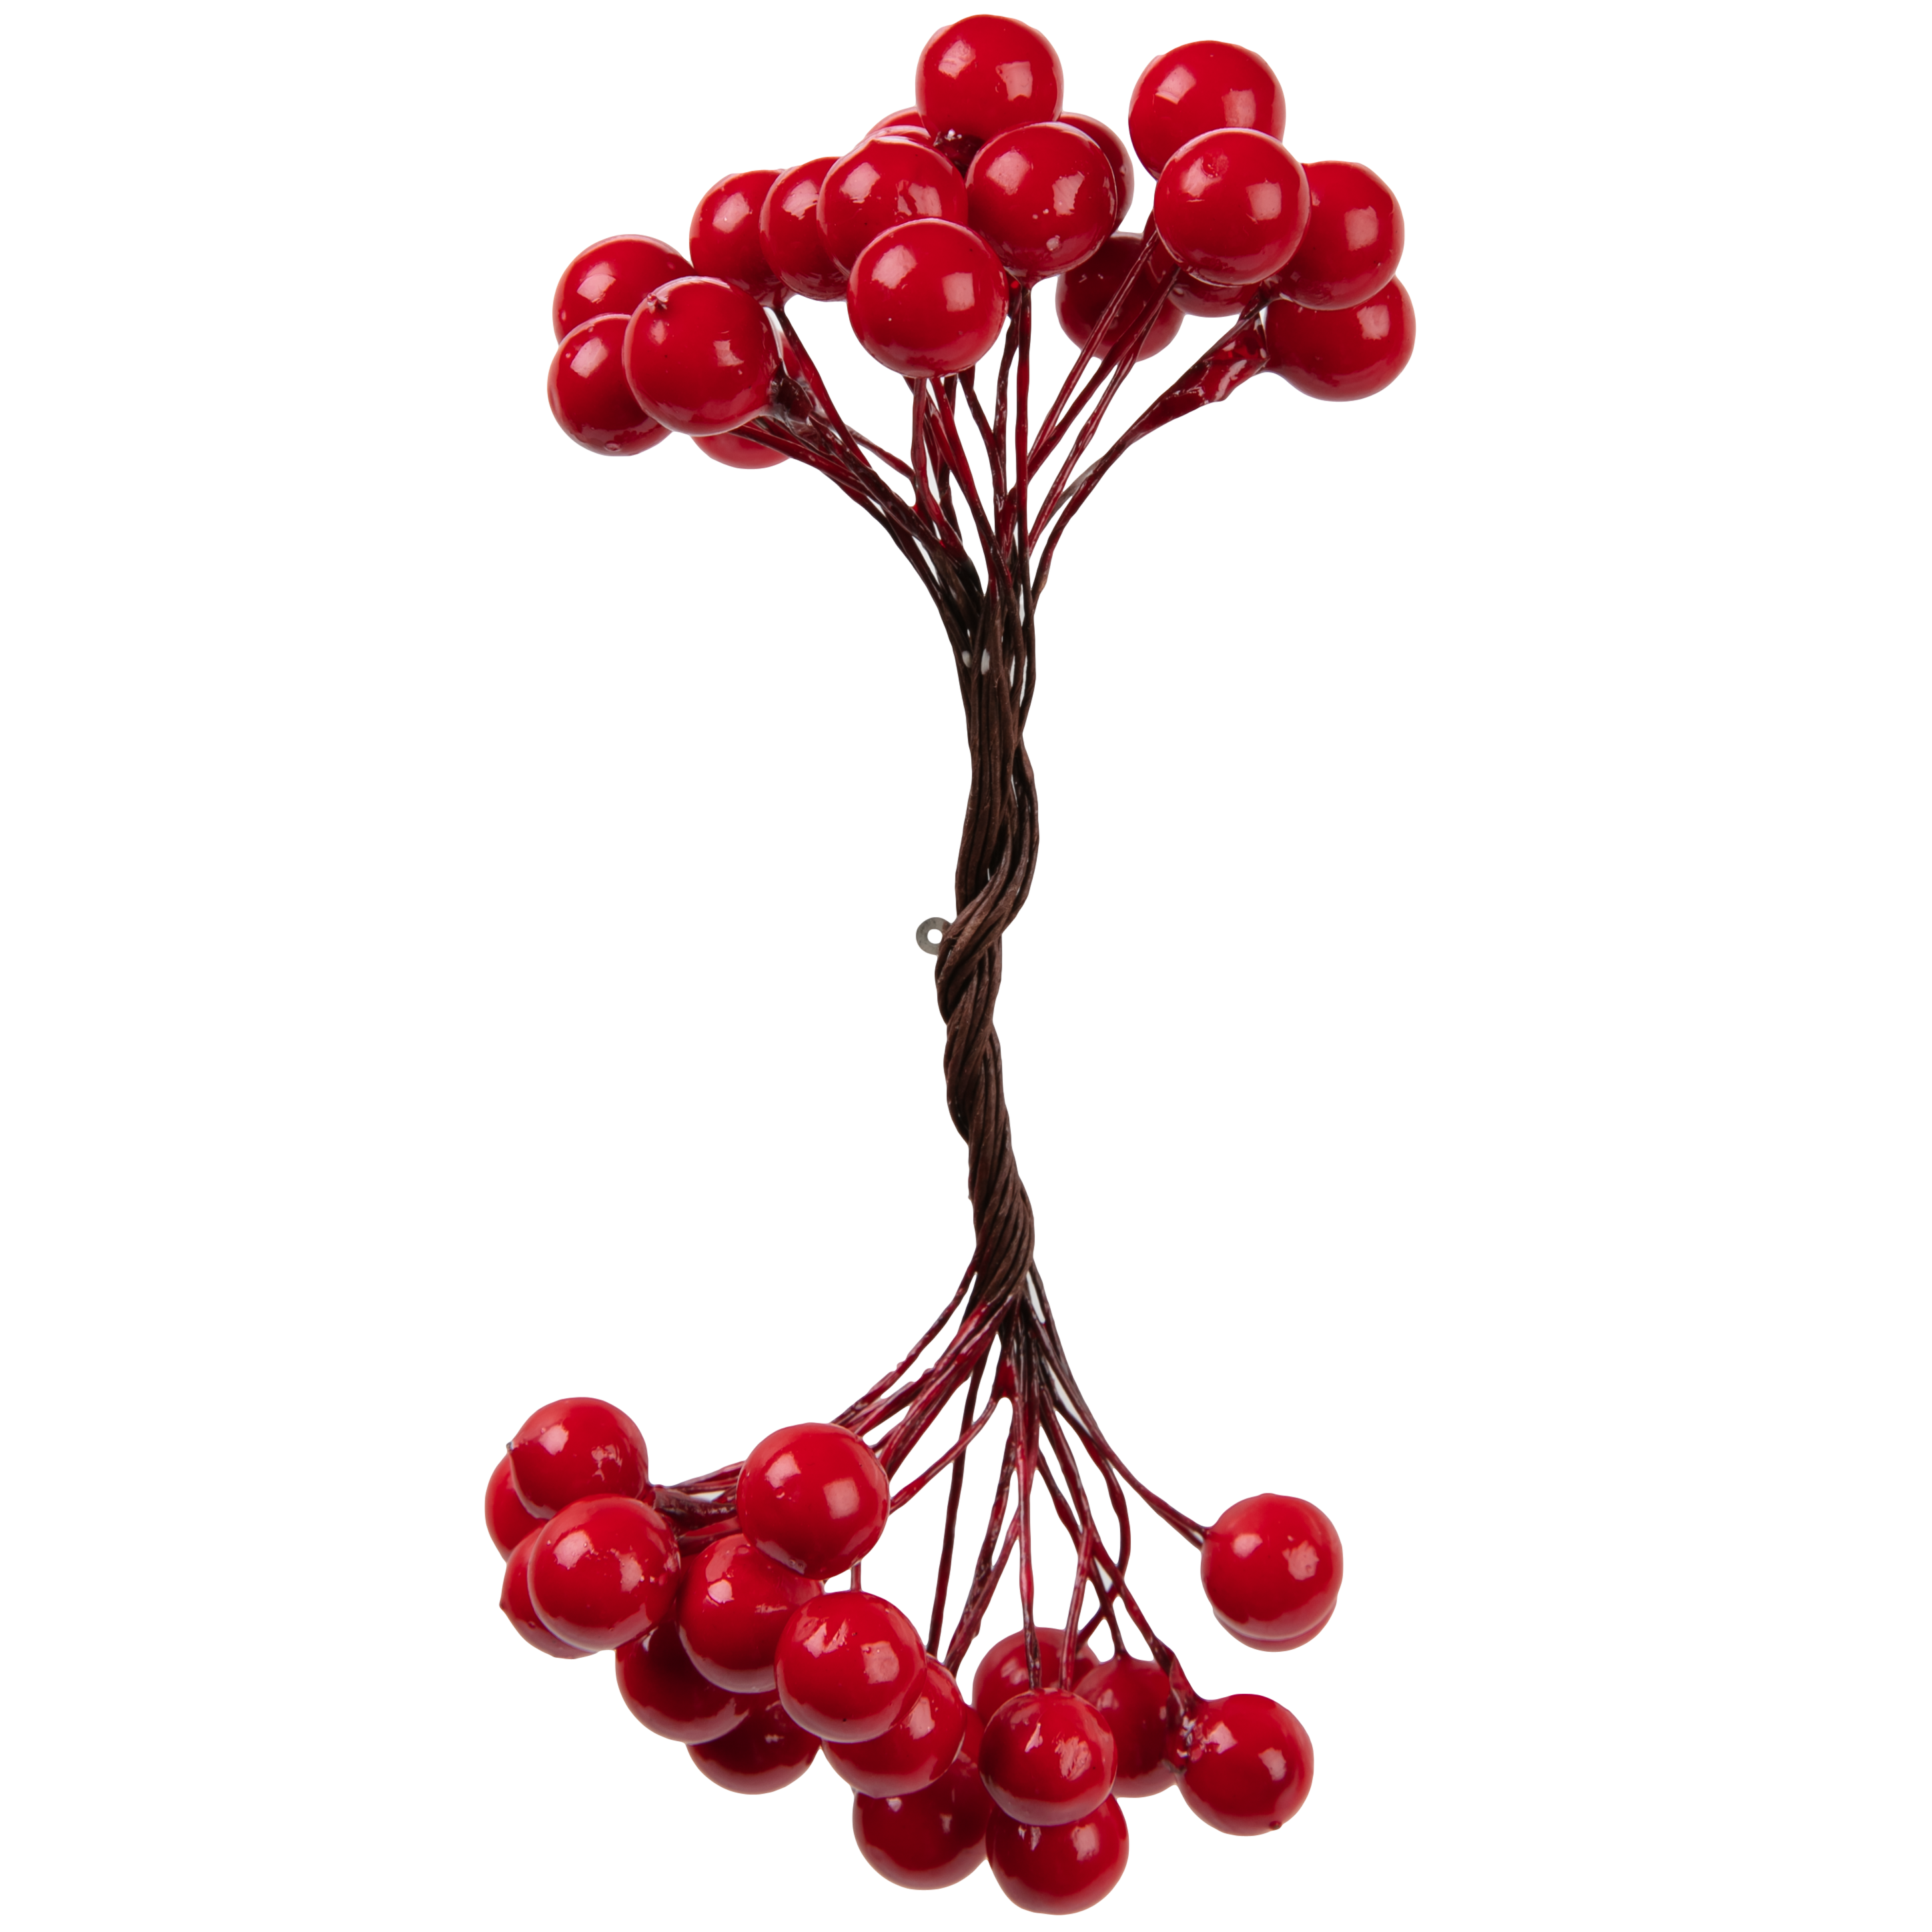 Unleash Potential by using Make a Merry Christmas Red Berry Stems